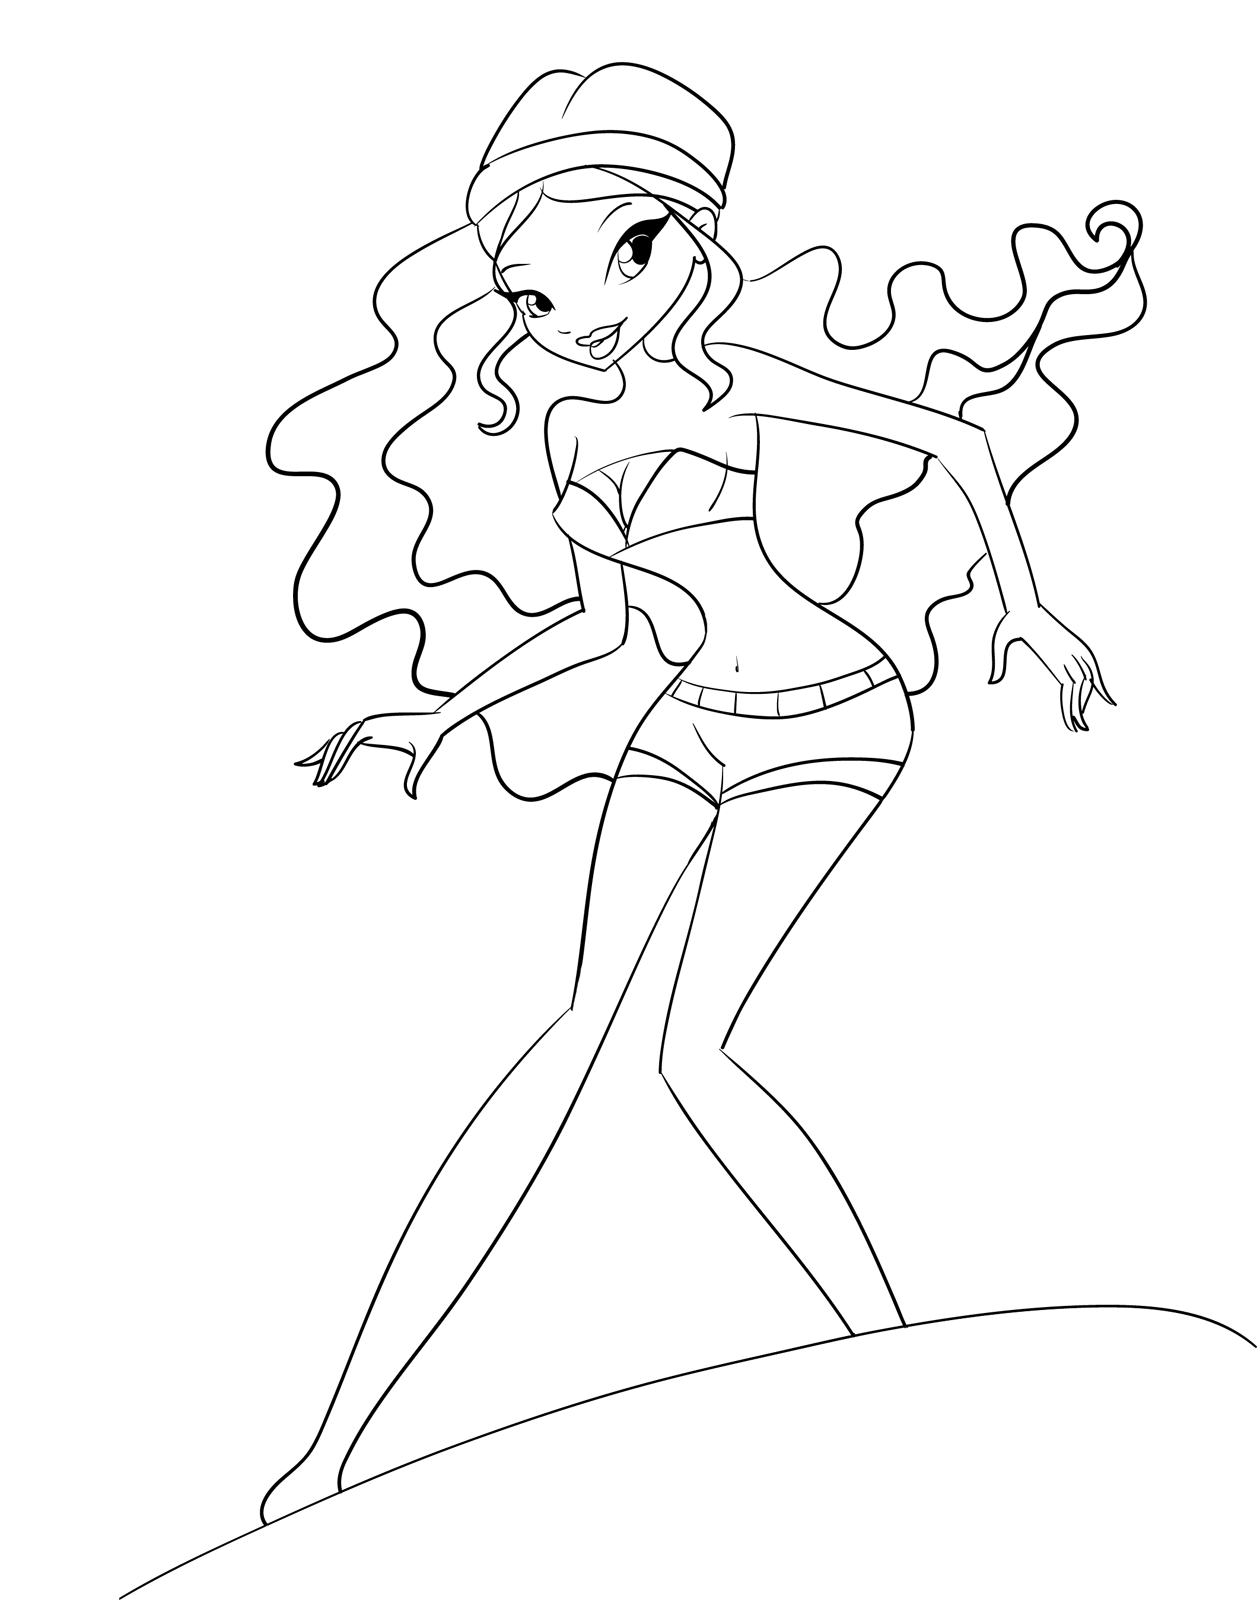 winx club coloring pages layla layla winx coloring pages download and print layla winx winx coloring layla club pages 